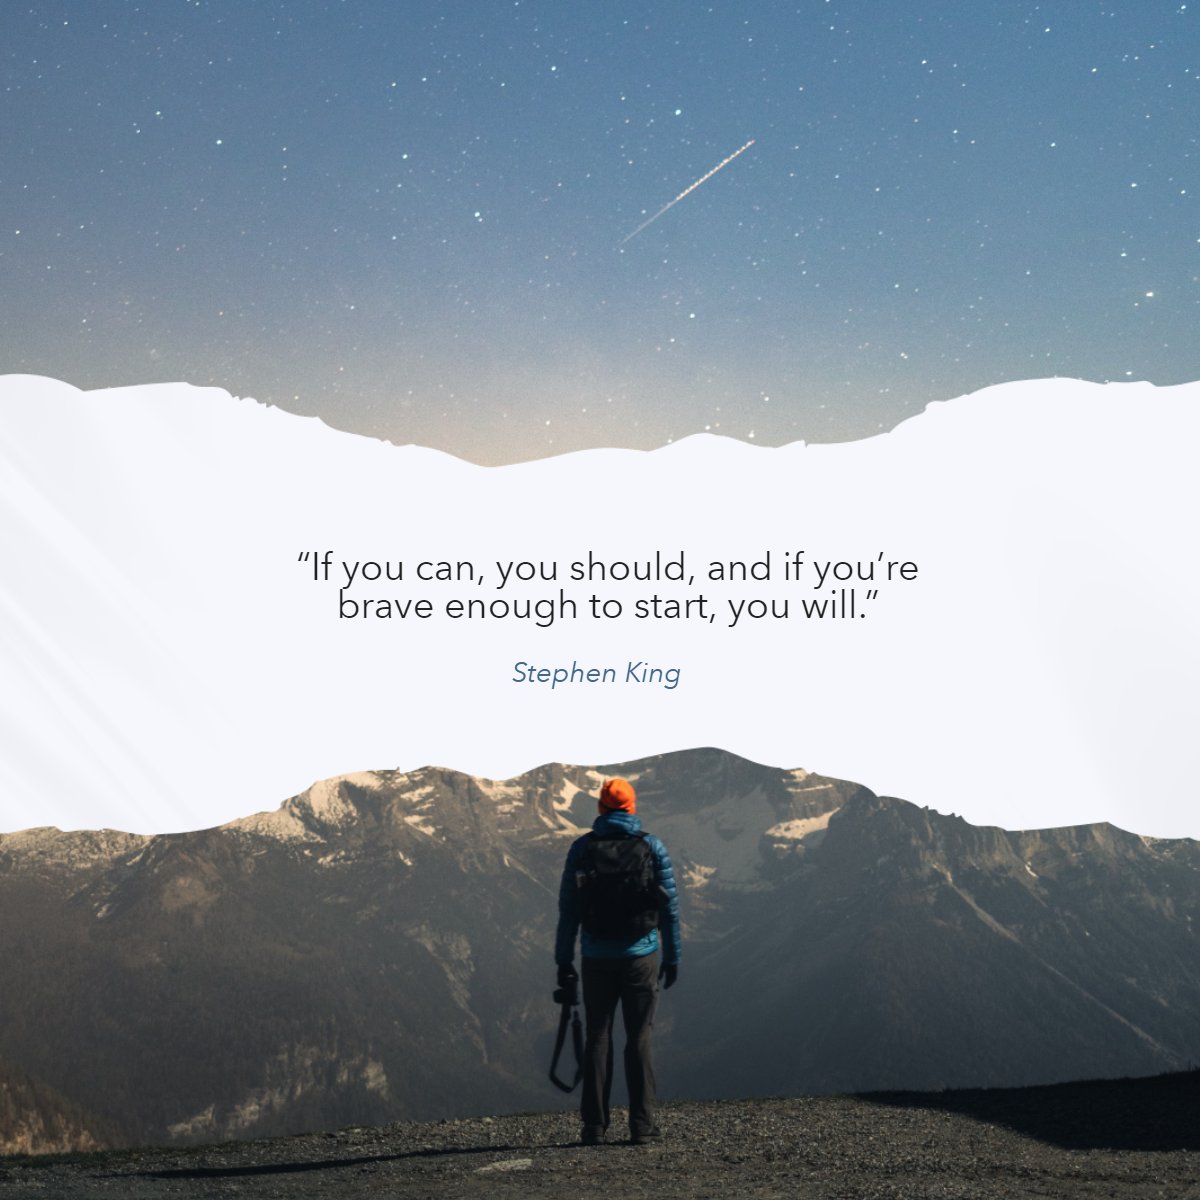 “If you can, you should, and if you're brave enough to start, you will.' 
— Stephen King

#Motivation #Inspirational #QuoteoftheDay
 #homeselling #evanrussell #realestate #northreading #homesearch #homebuying #firsttimehomebuying #realtor #realestateagent